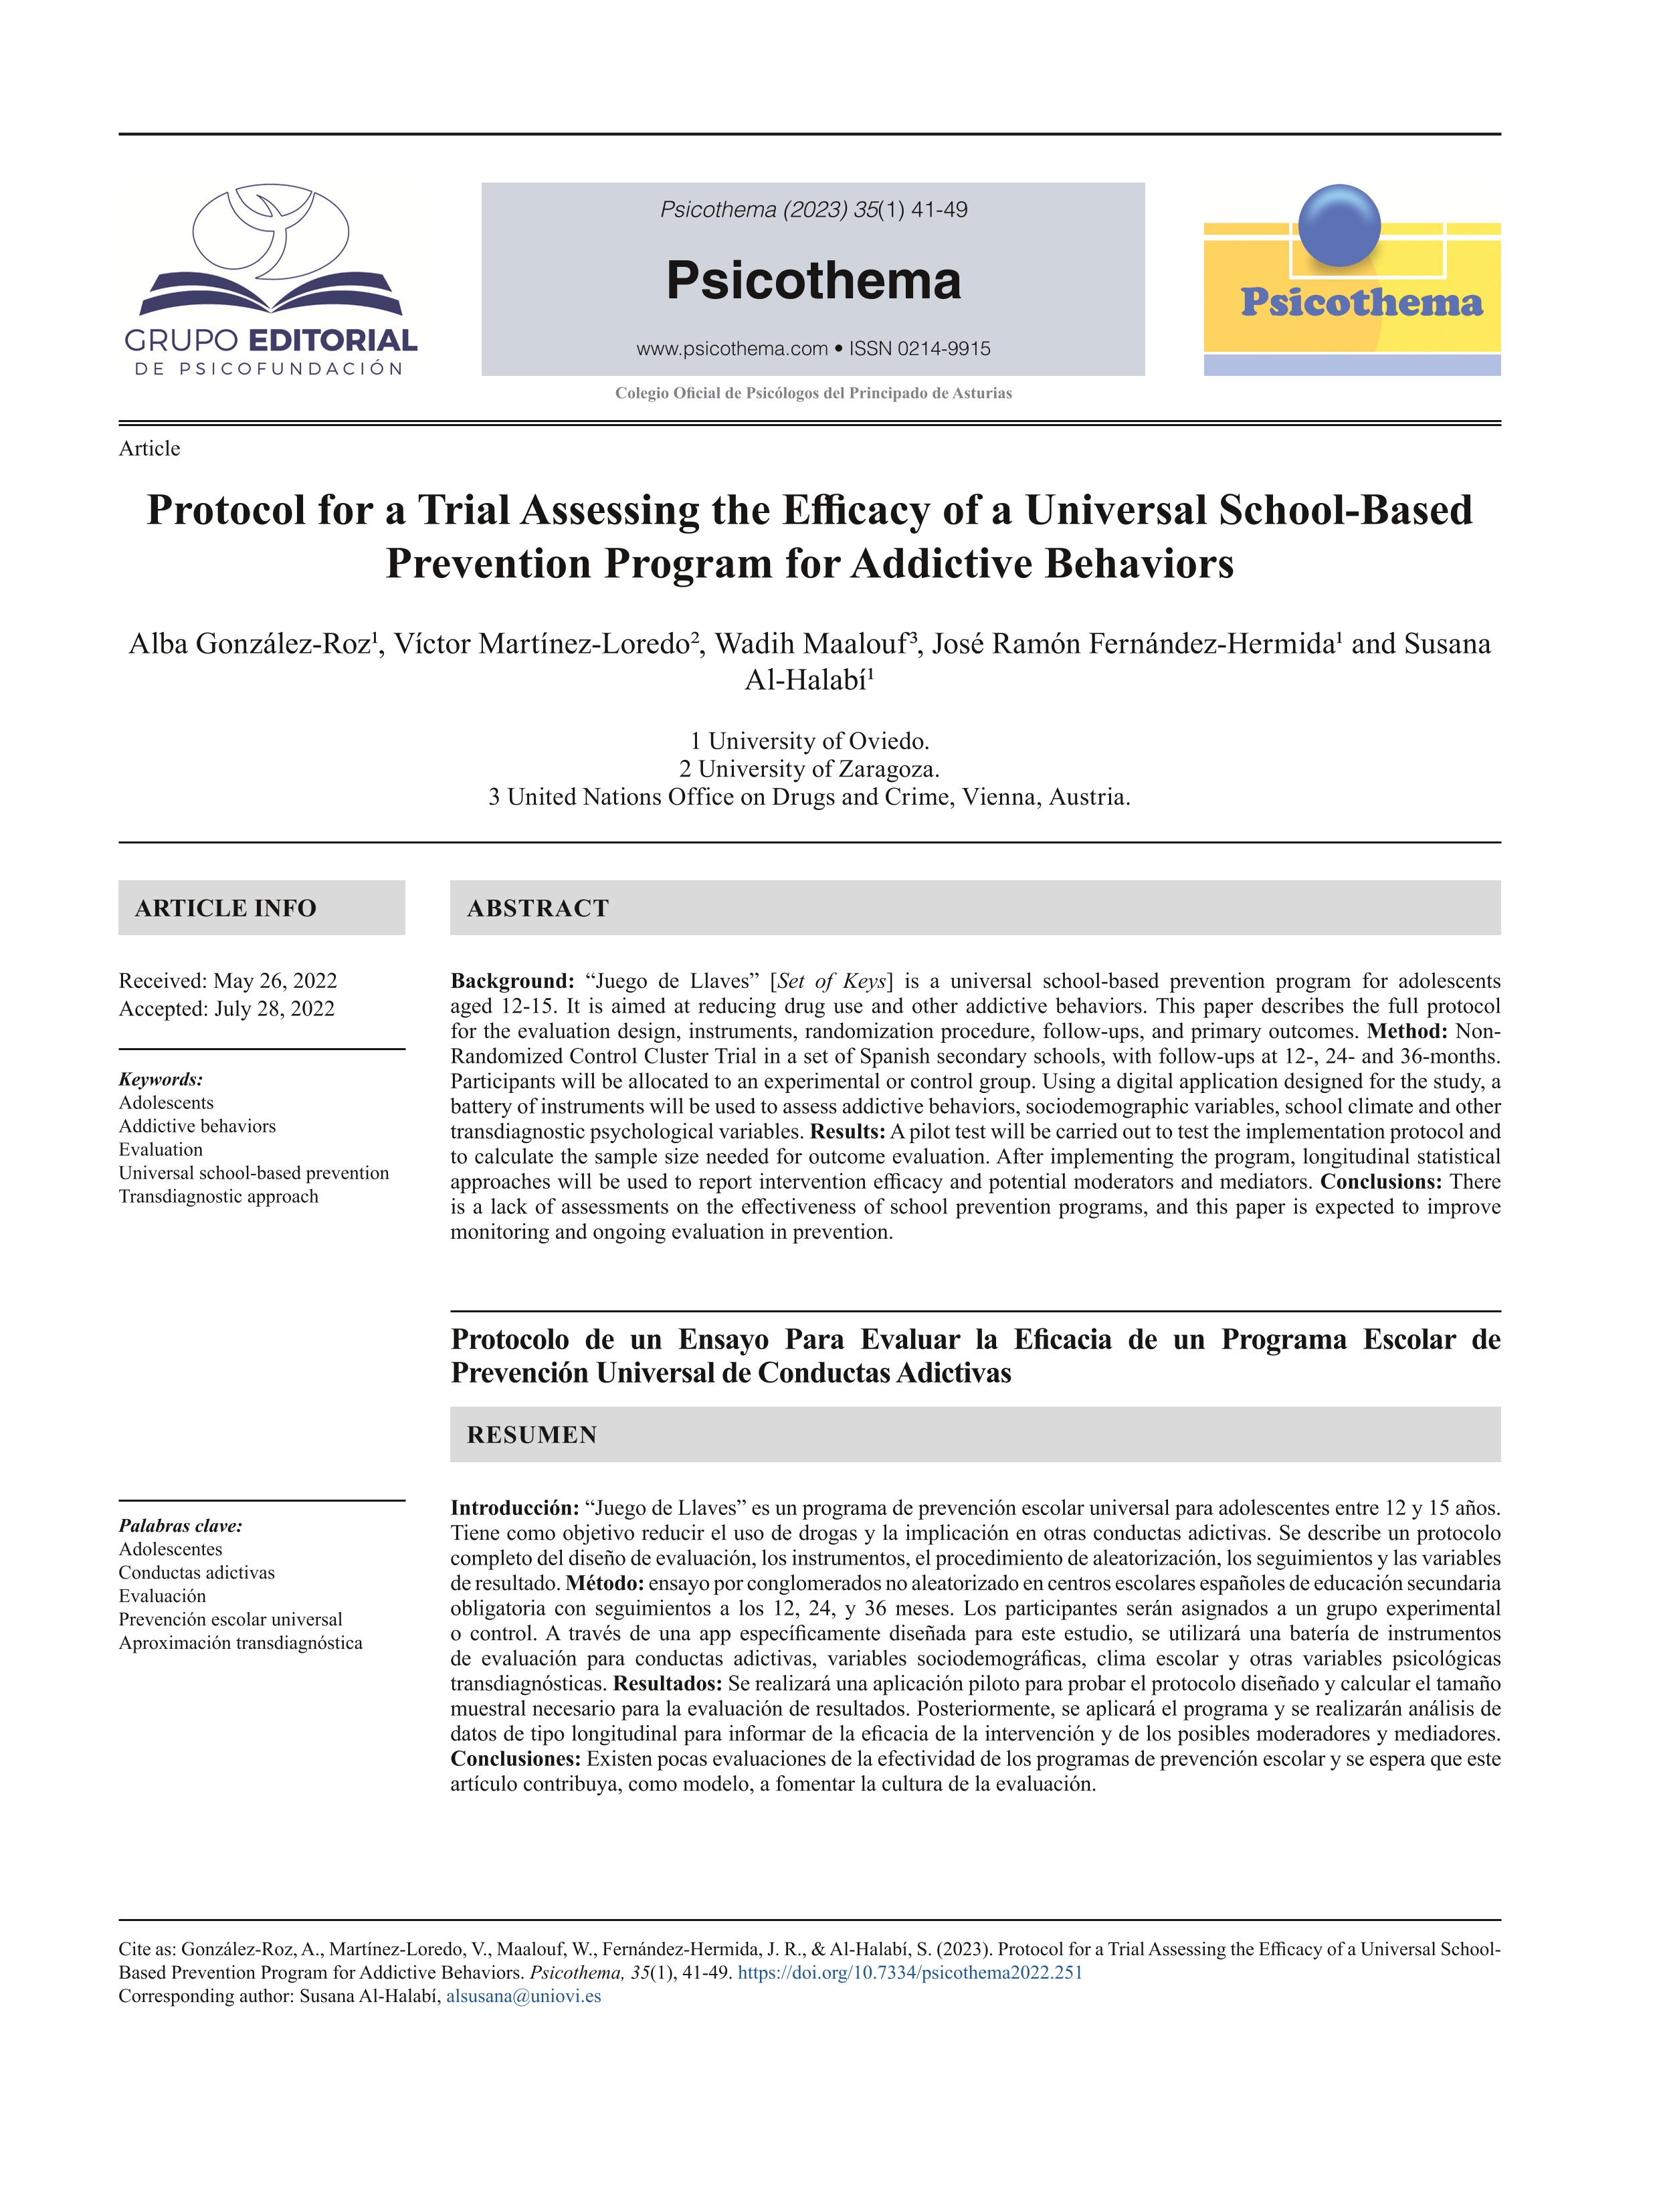 Protocol for a trial assessing the efficacy of a universal school-based prevention program for addictive behaviors